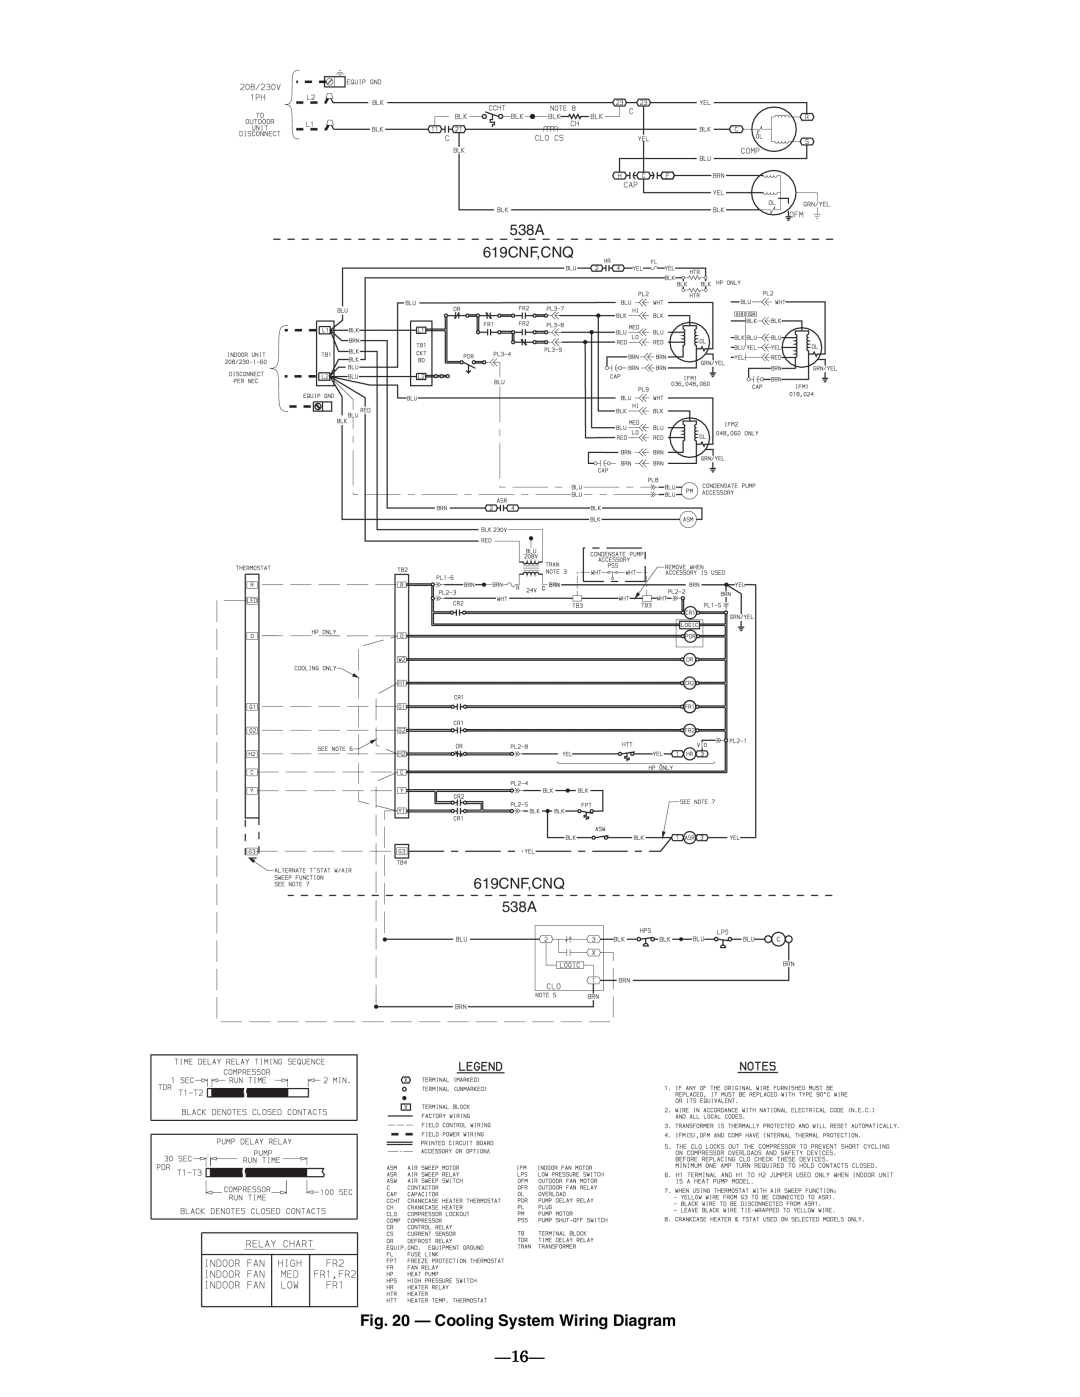 Bryant 619CNF, 619CNQ installation instructions Cooling System Wiring Diagram, a40-1636 